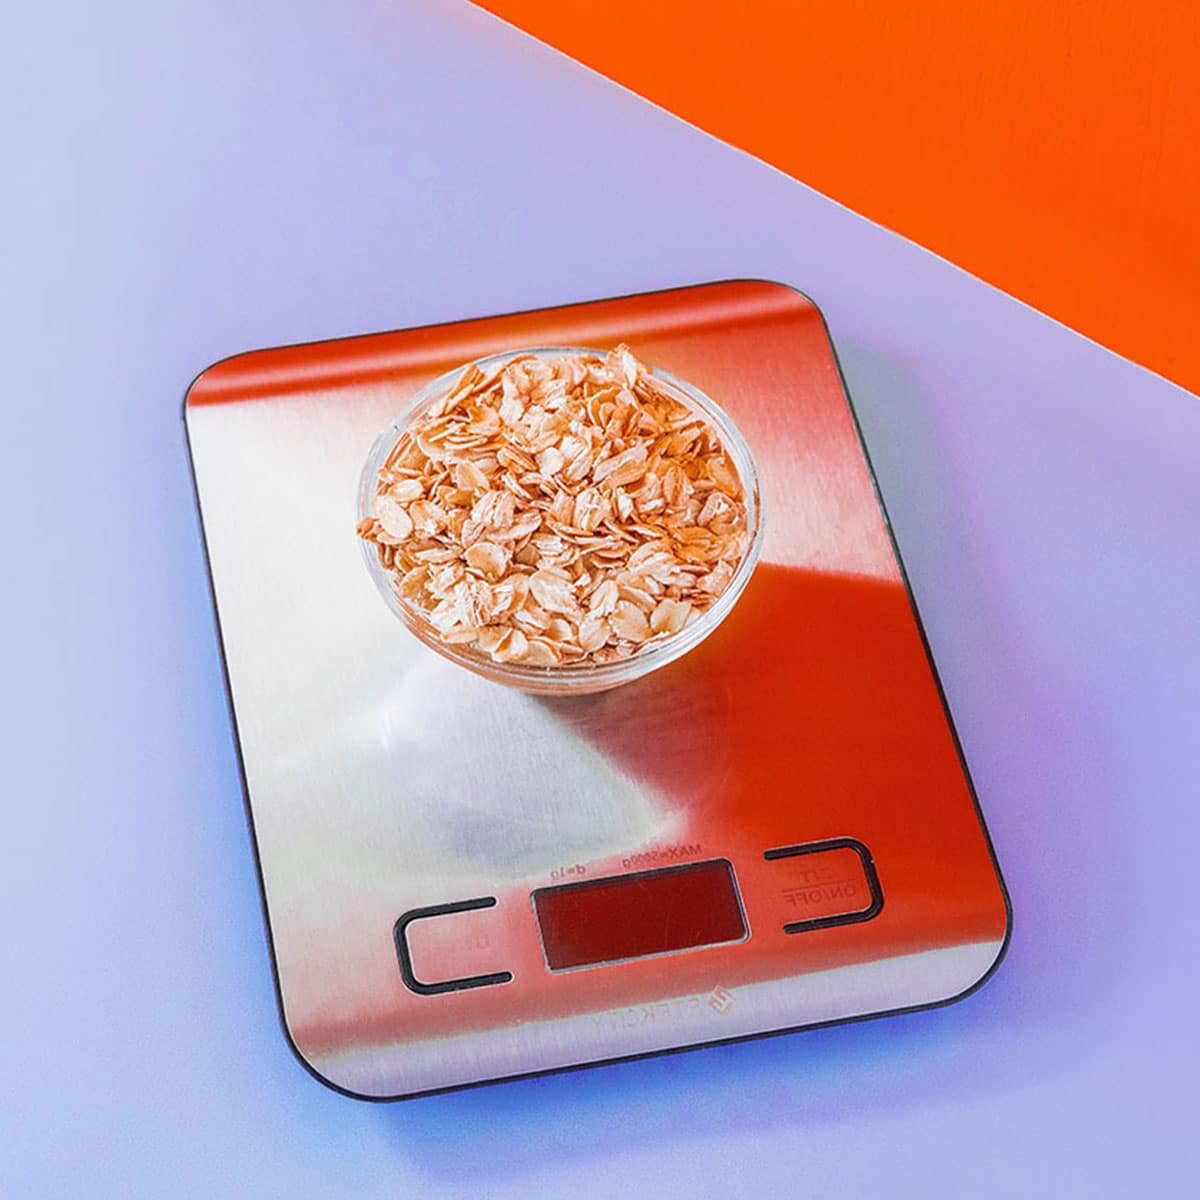 Oatmeal on an electric kitchen scale